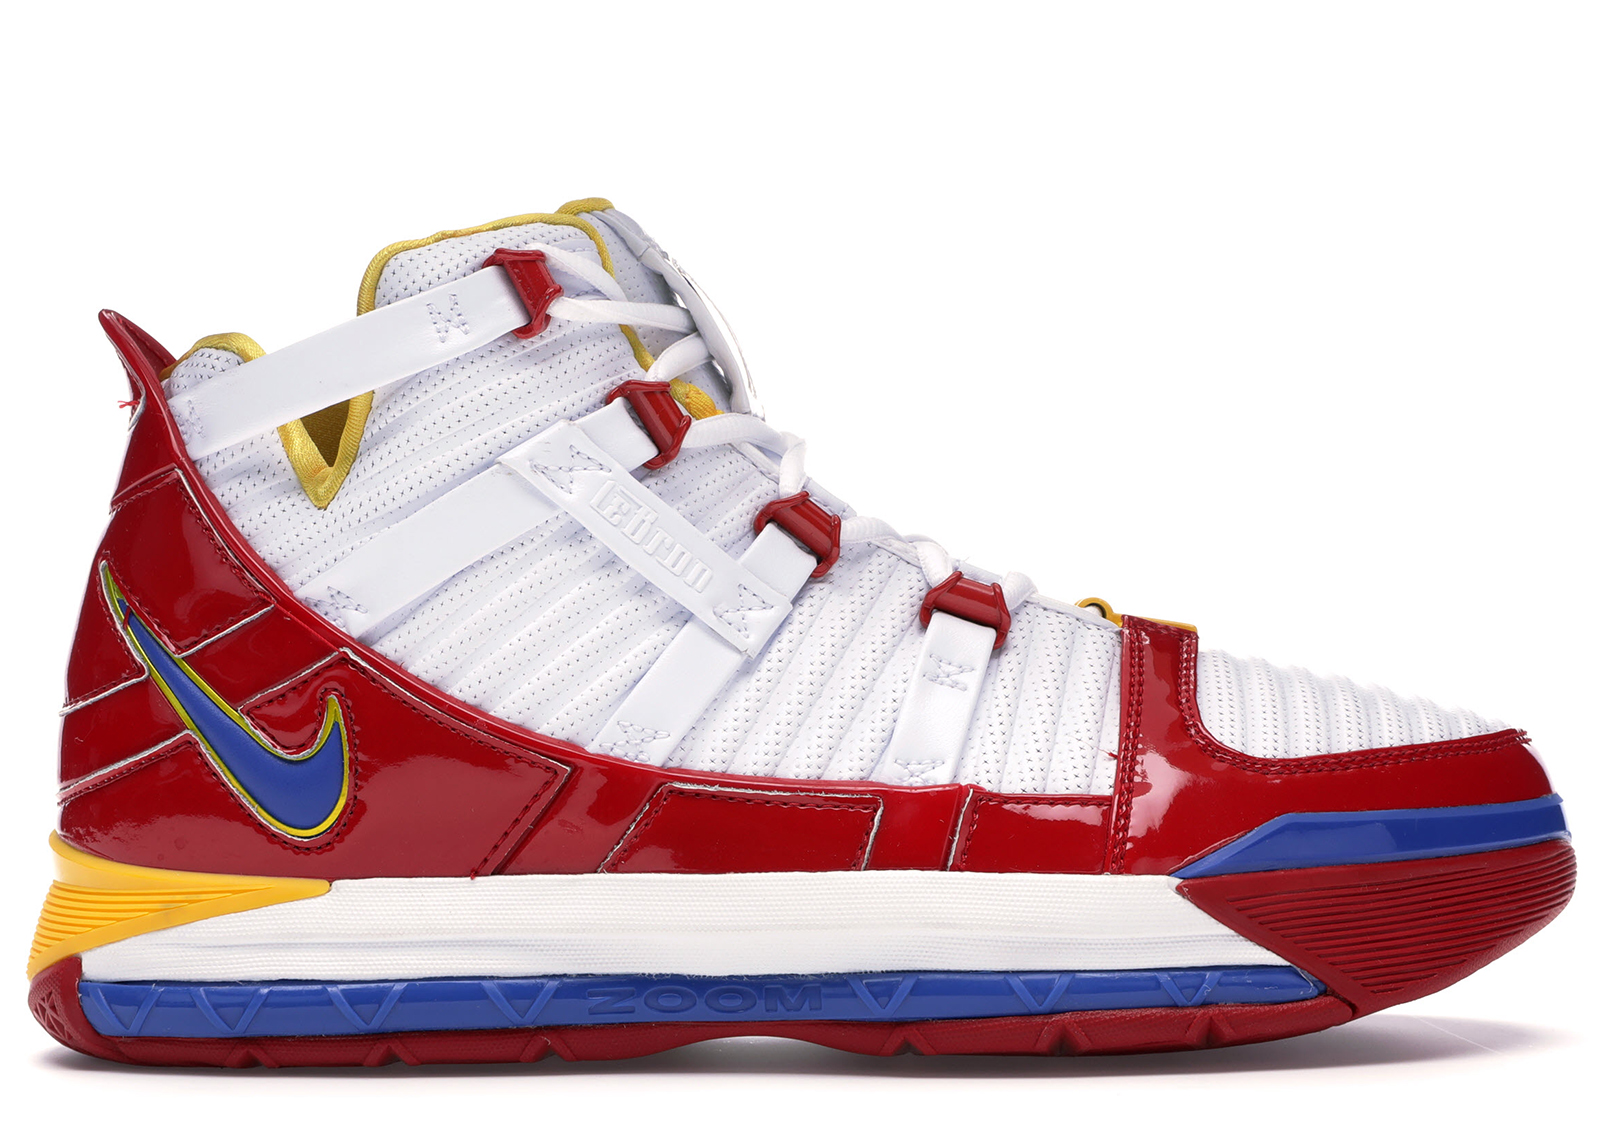 Nike LeBron 3 Shoes - Release Date